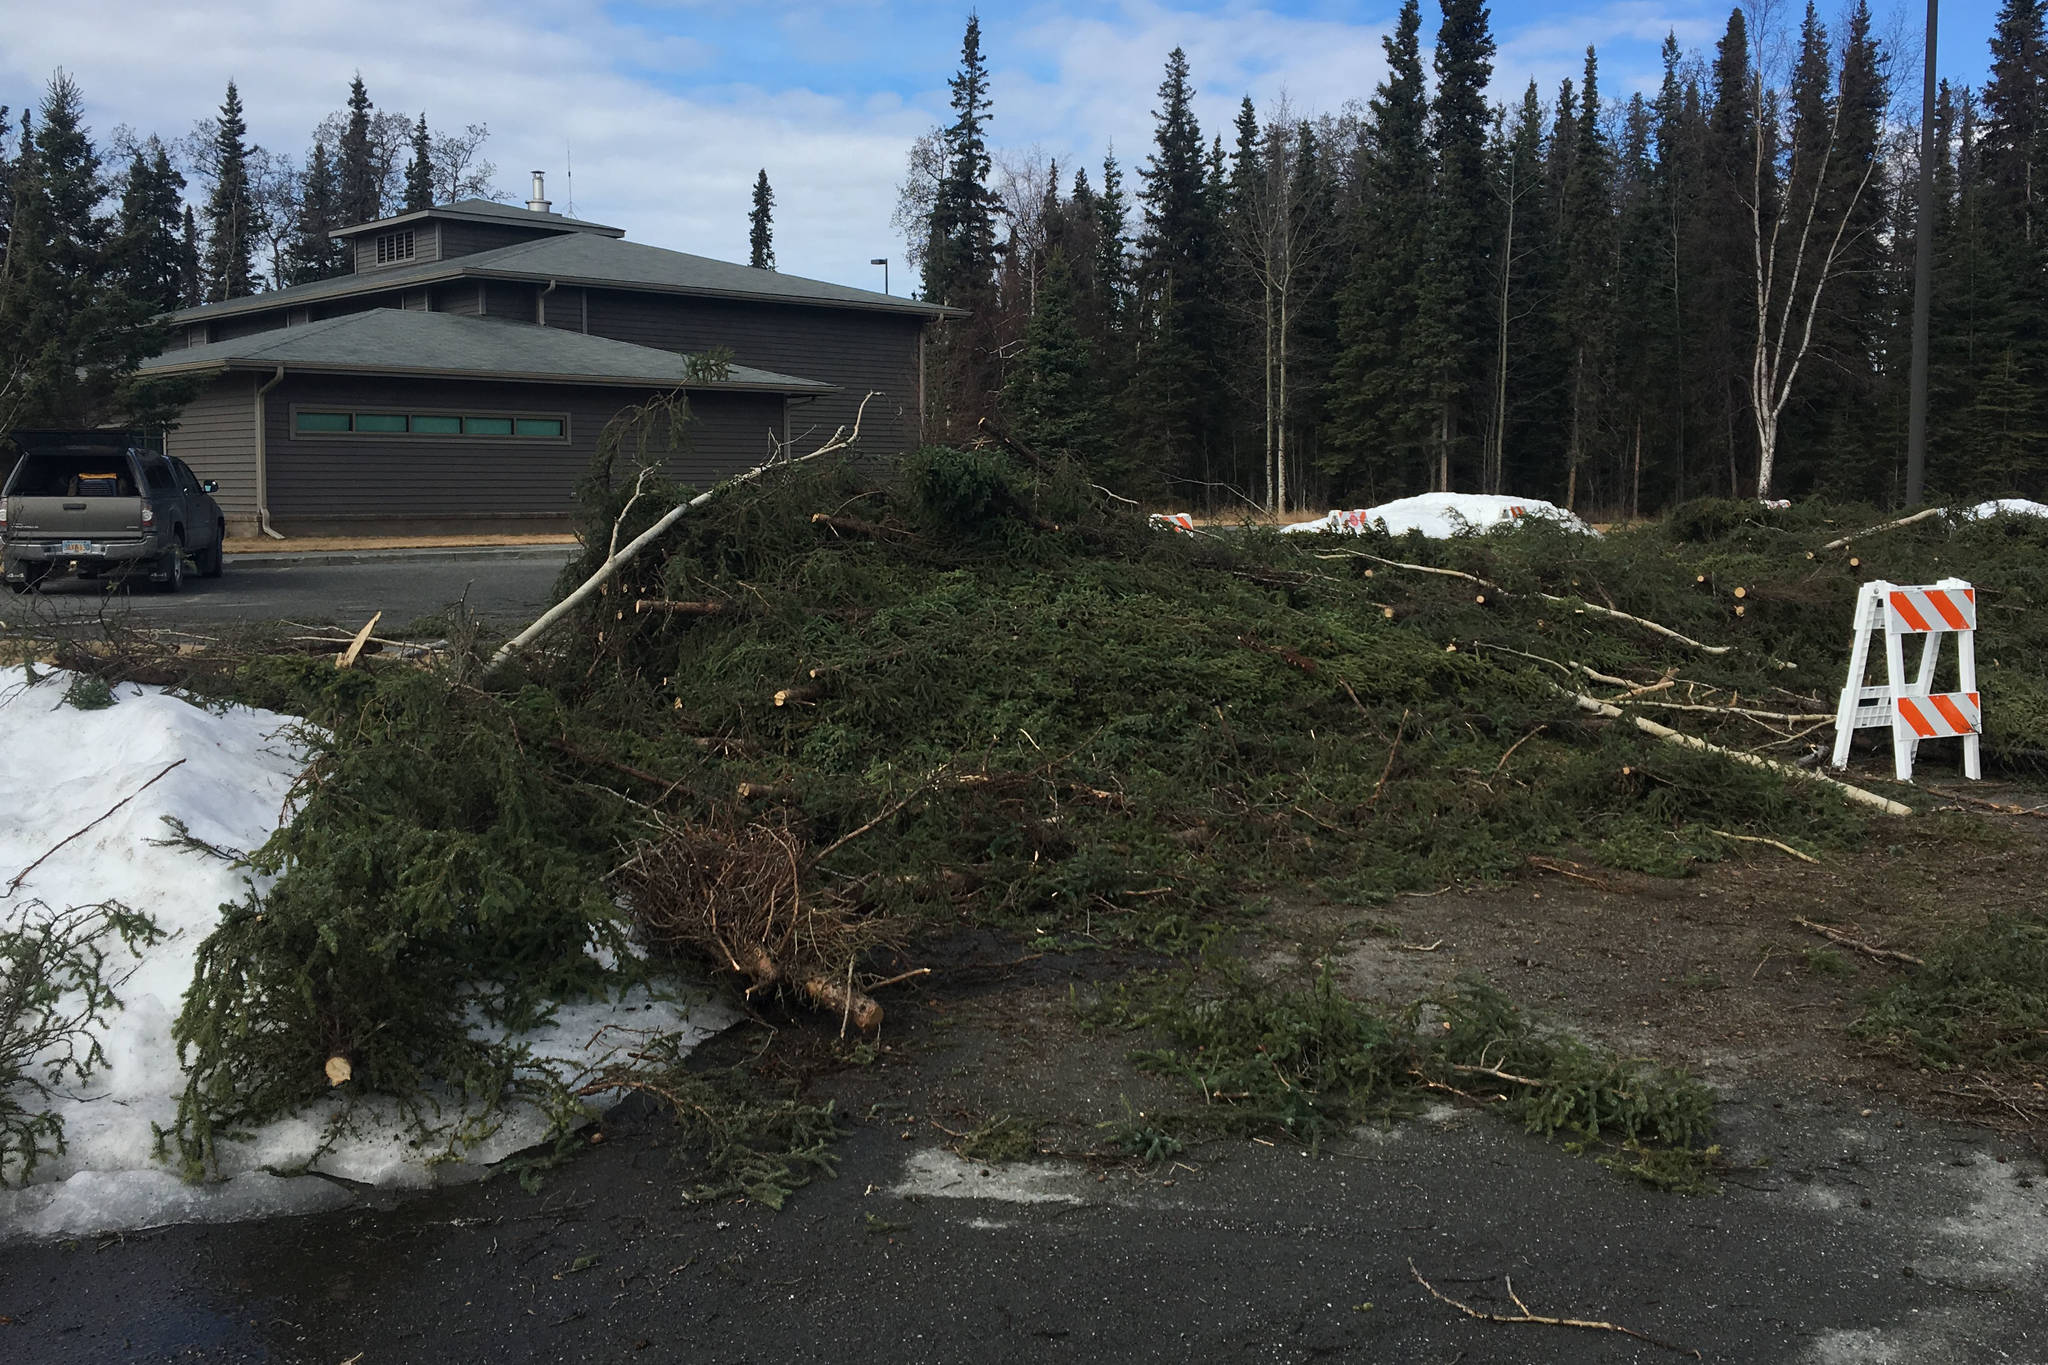 Felled spruce trees wait to be picked up by property owners and used for revetment purposes outside of the Kenai River Center in Kenai, Alaska on April 9, 2019. (Photo courtesy of Mike Hill/USFWS)